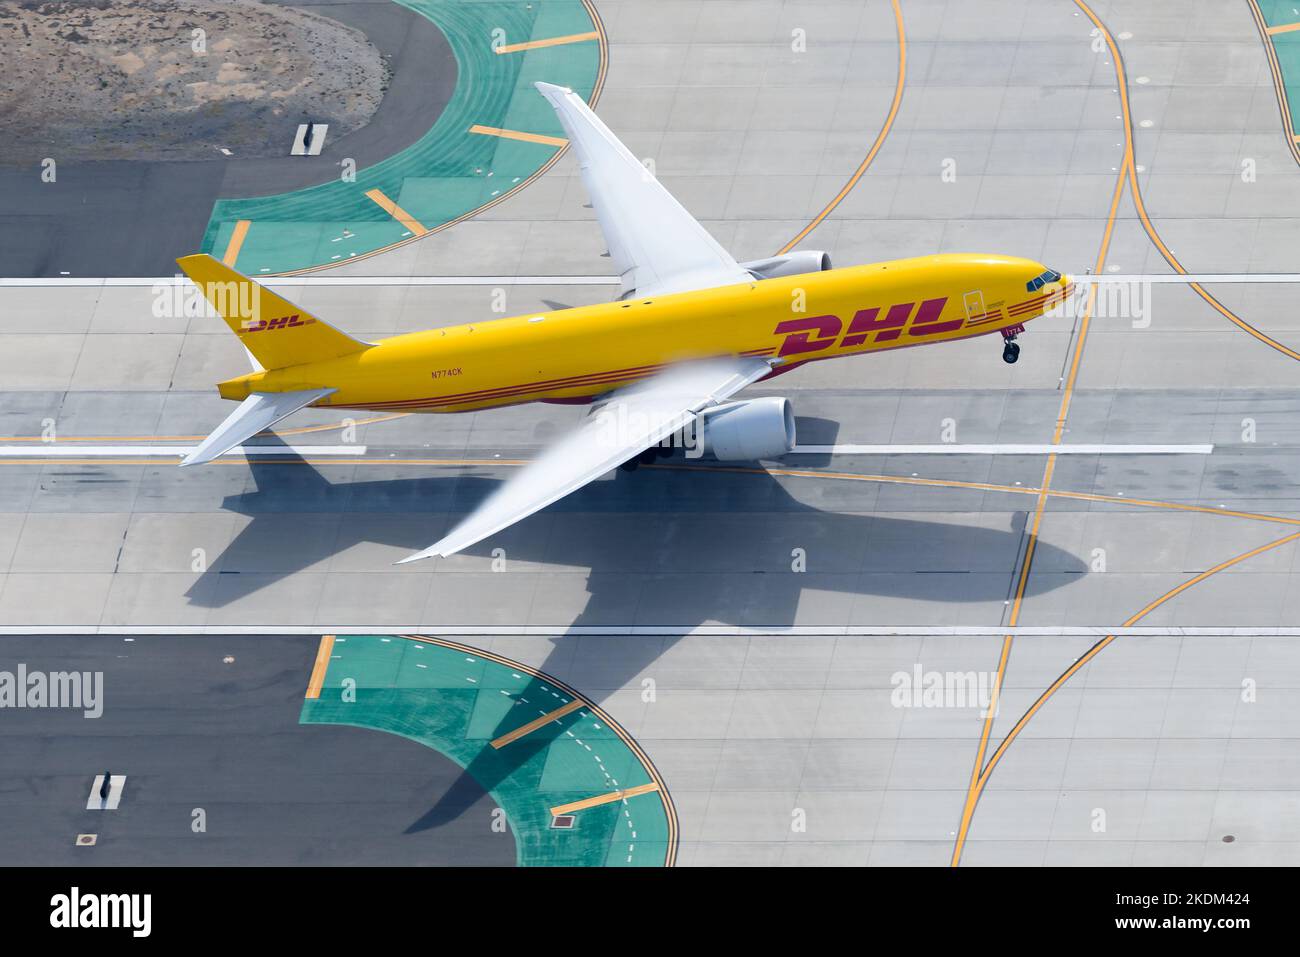 DHL Cargo airplane Boeing 777 taking off. Transport of freighter on DHL Kalitta Air aircraft 777F. Aircraft take off with condensation above wings. Stock Photo